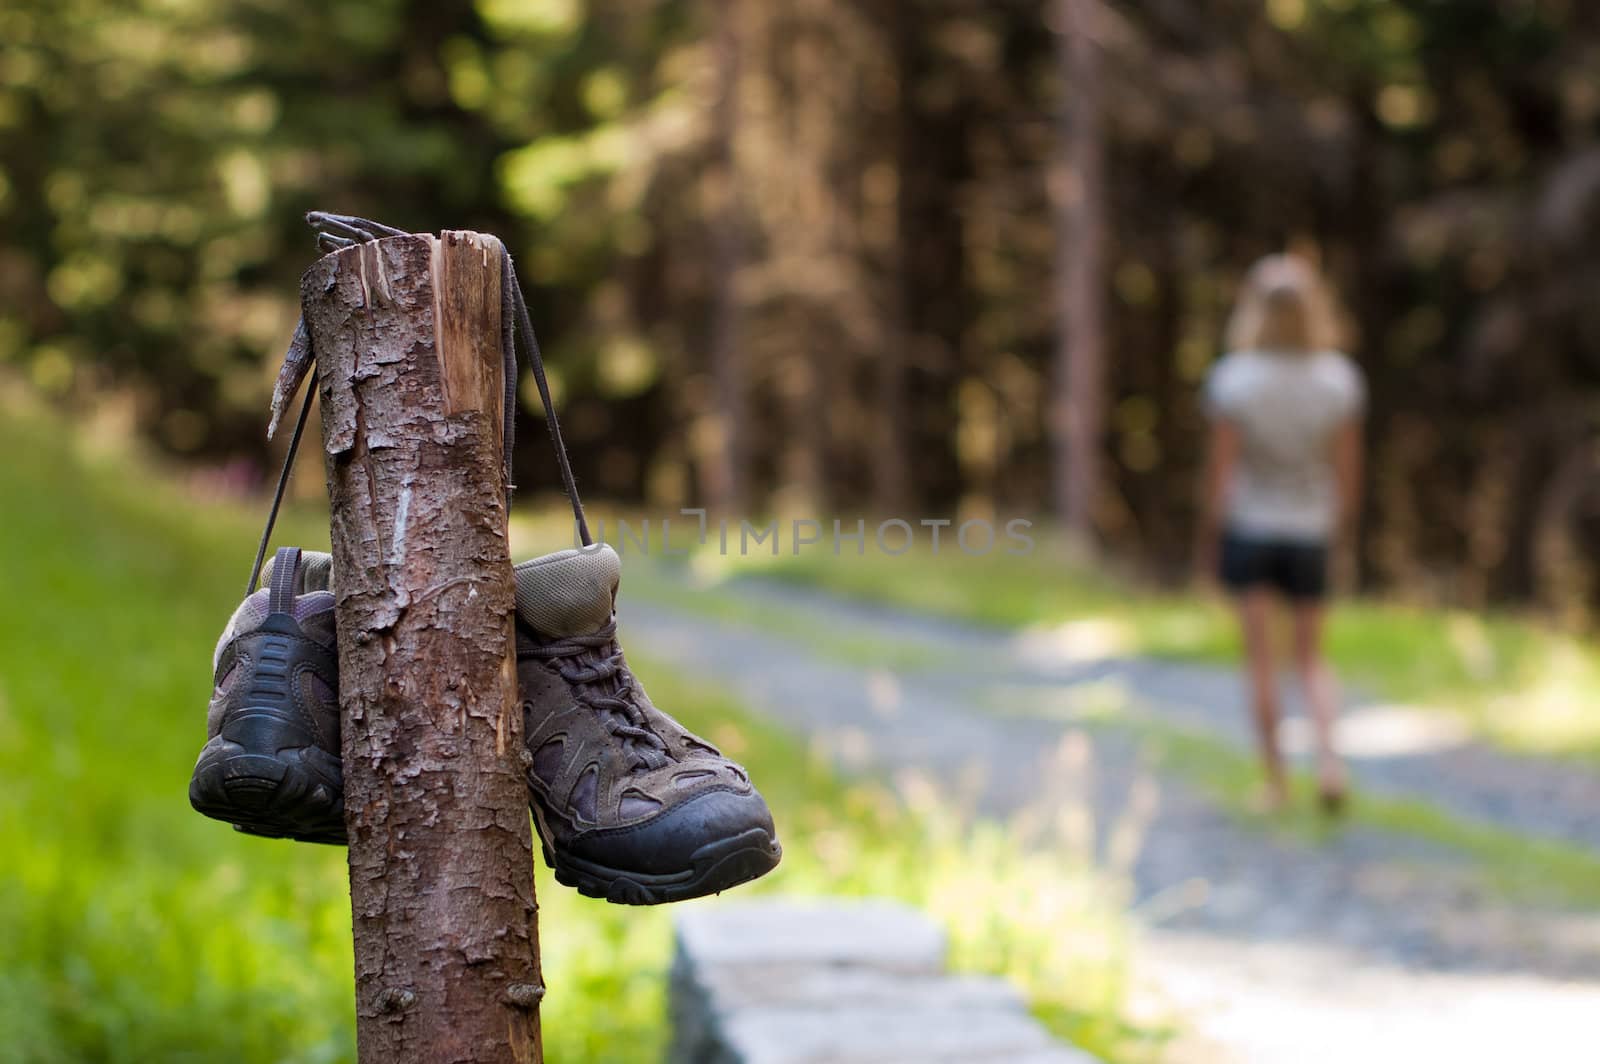 Abandoned hiking shoes with a woman walking bare feet